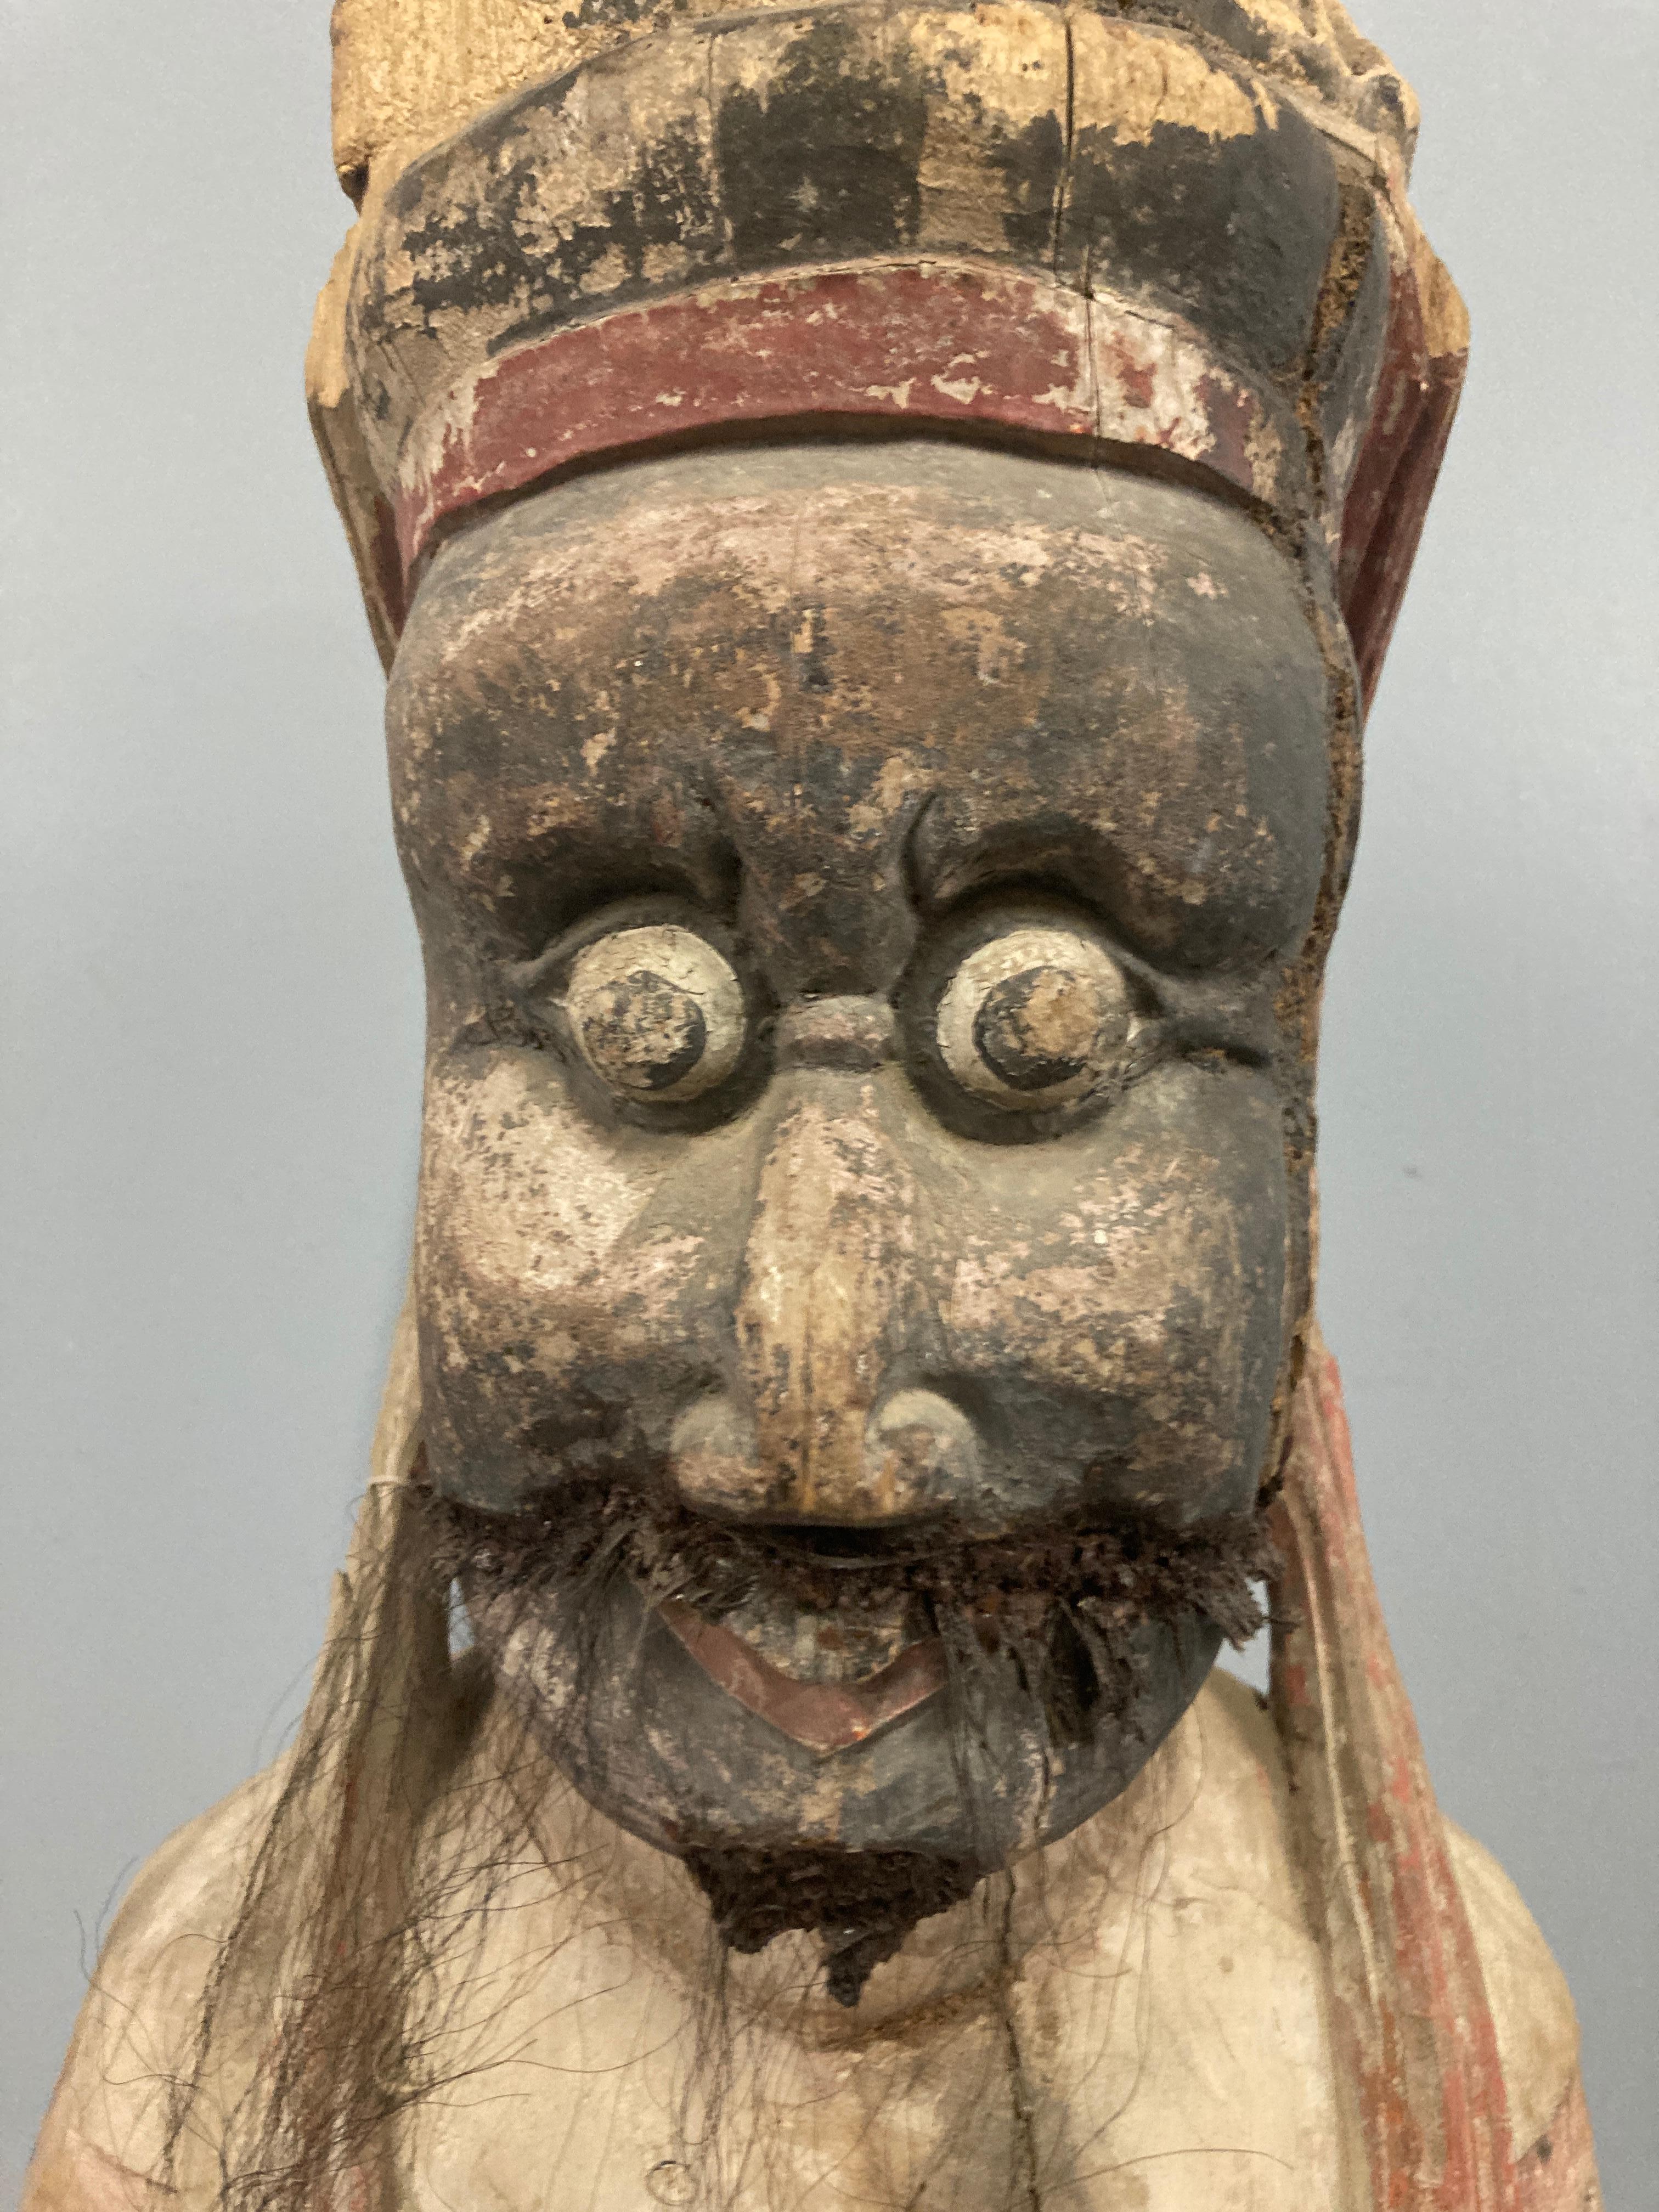 A carved wood Budda from the Shanxi region, made during the Ming Dynasty. The carved figure has an ancient polychrome finish.